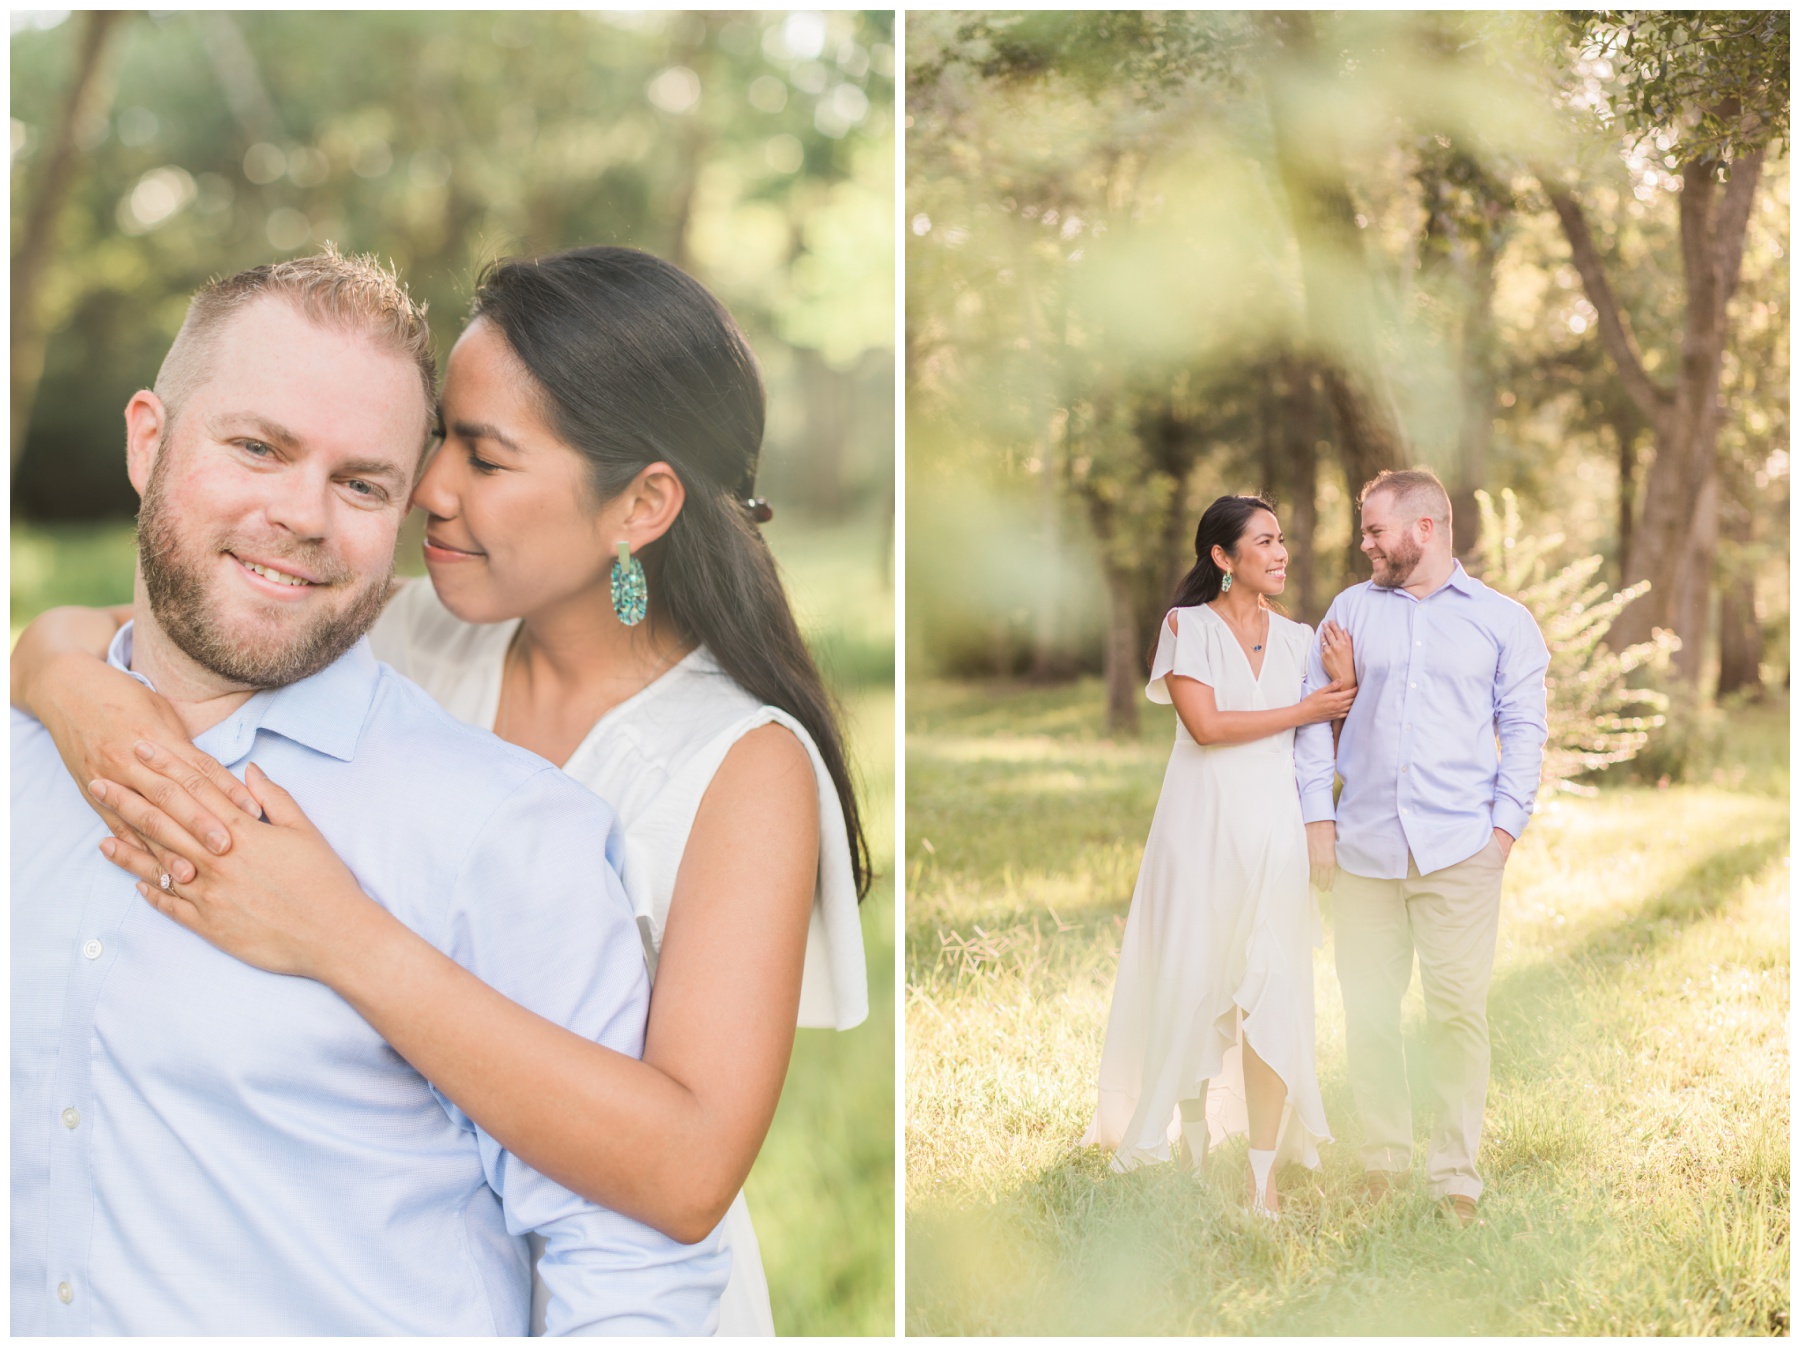 Romantic engagement session in Houston, Texas